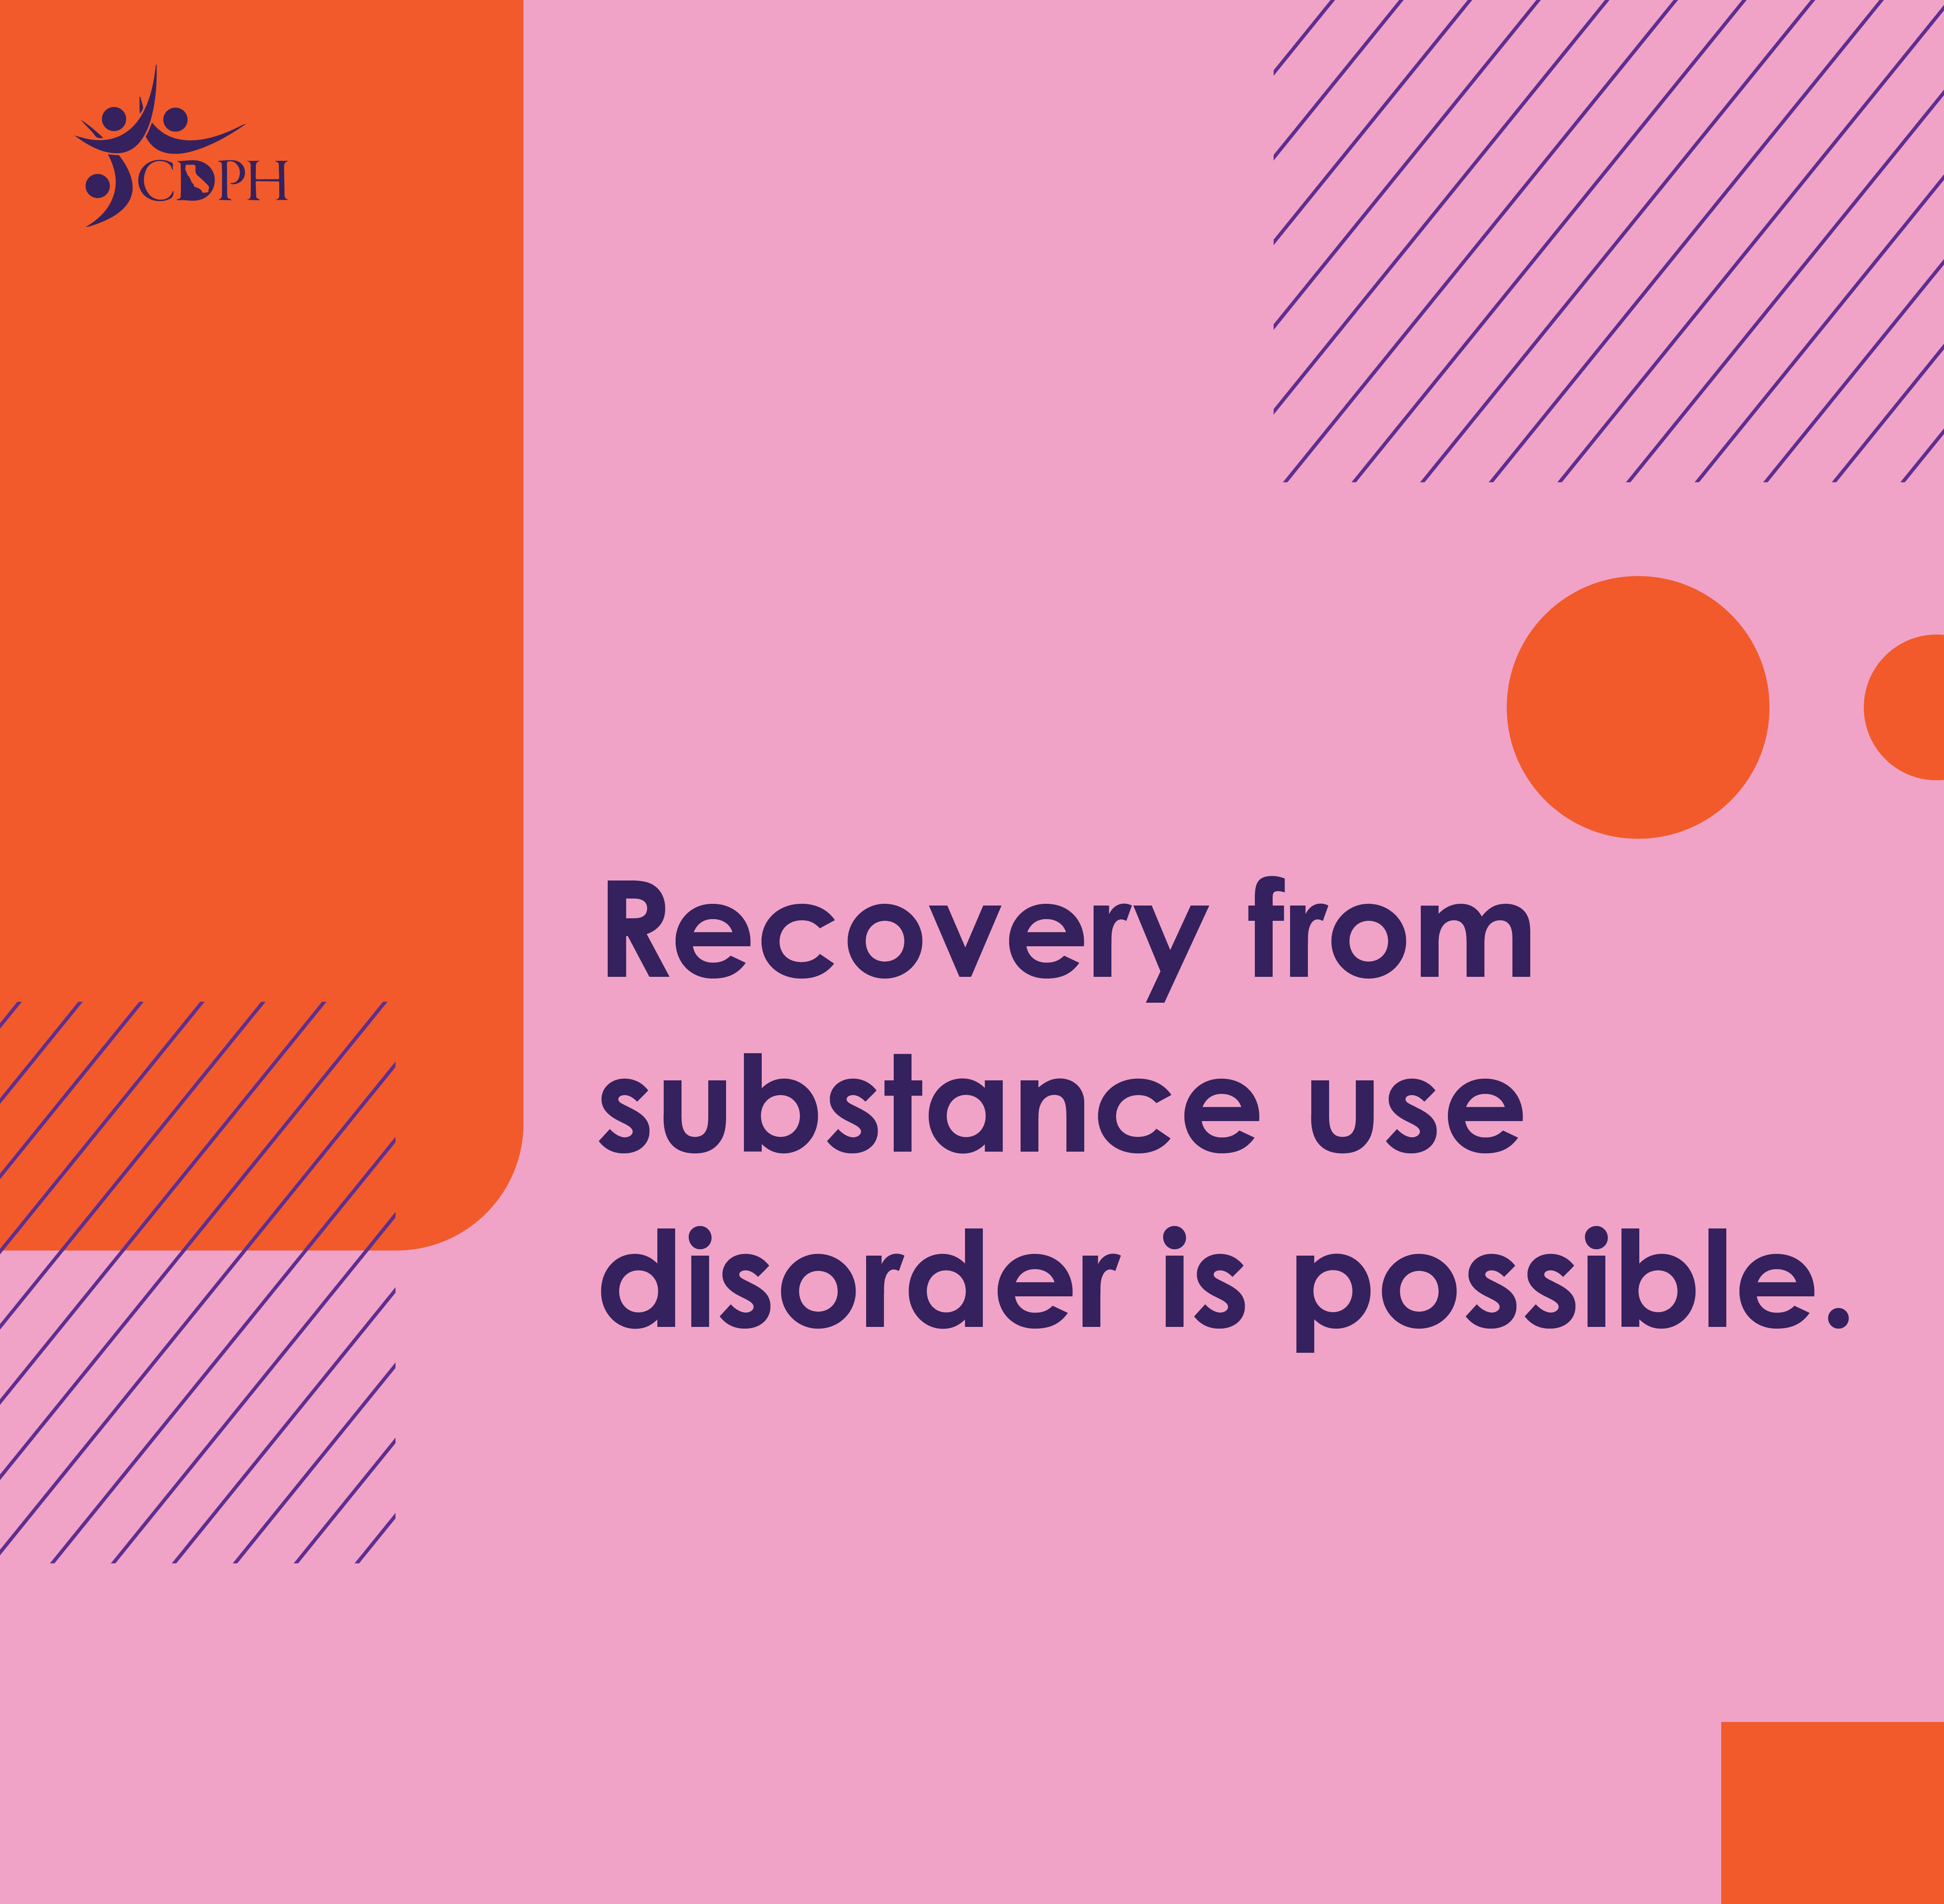 Recovery from substance use disorder is possible